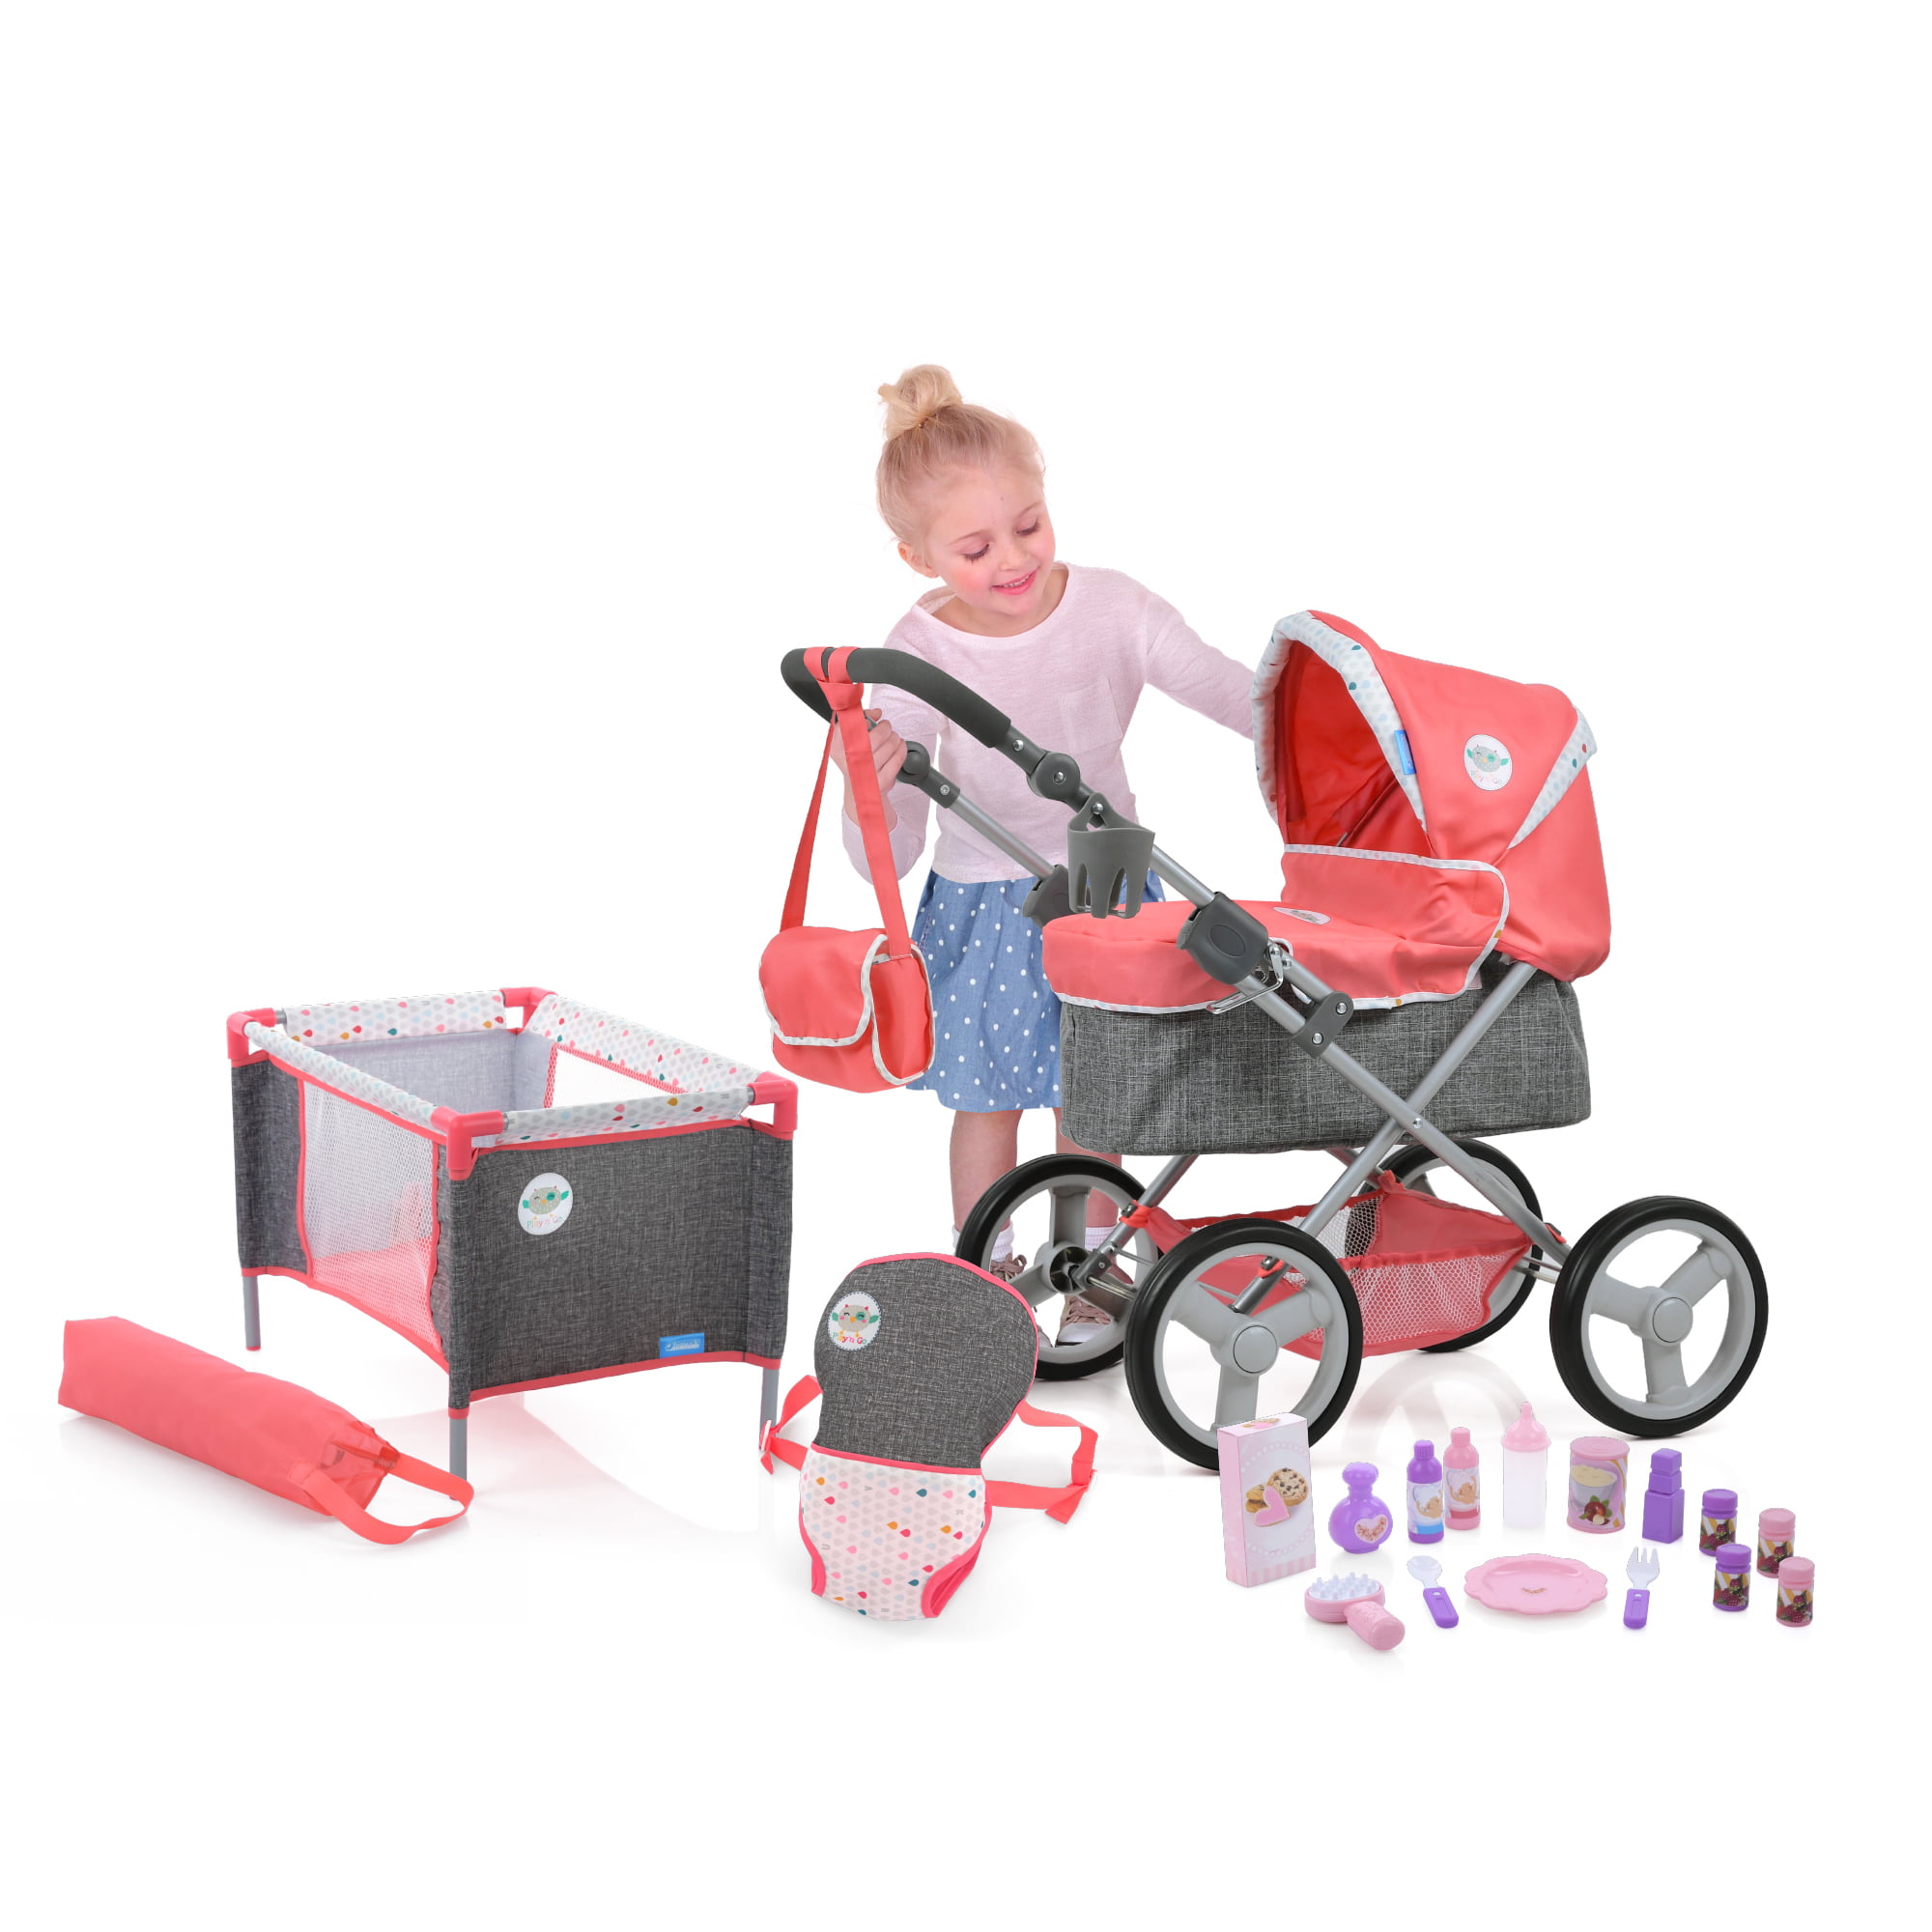 Set Toy Play and Diaper Front Hauck Play Carrier Go Yard, Piece Doll 15 - Pram N Bag,